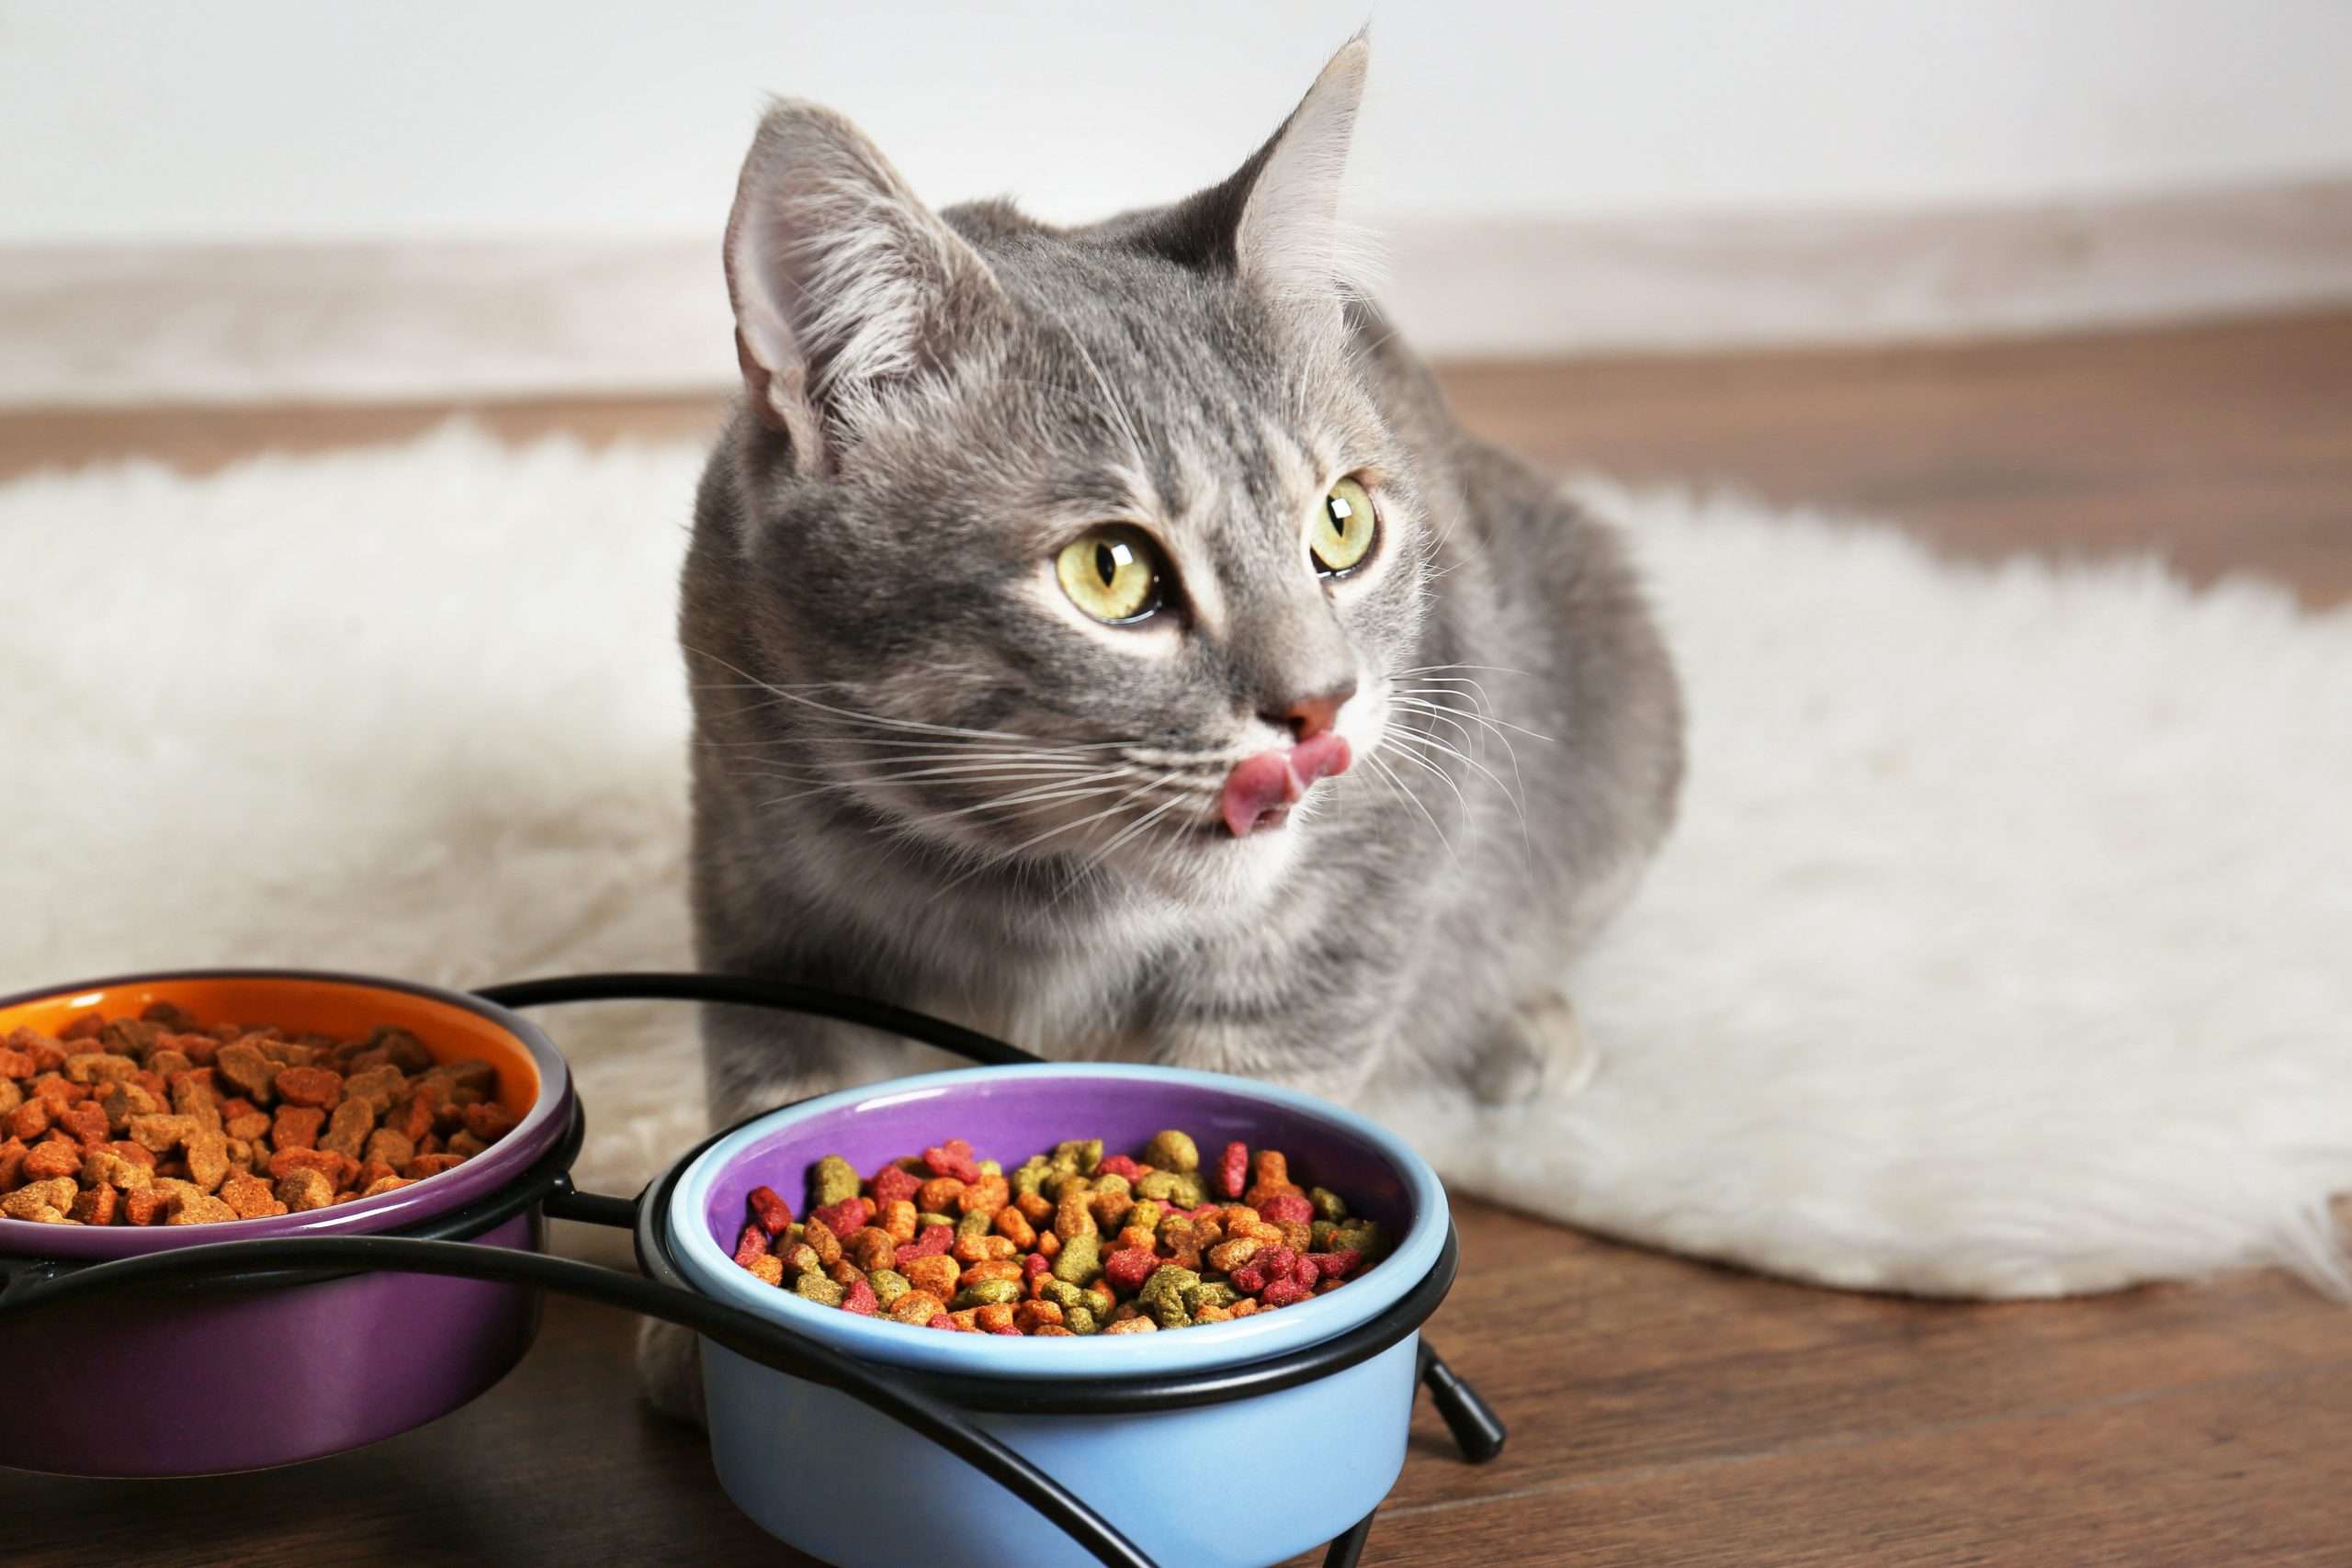 Best Dry Foods for Cats, According to Vets